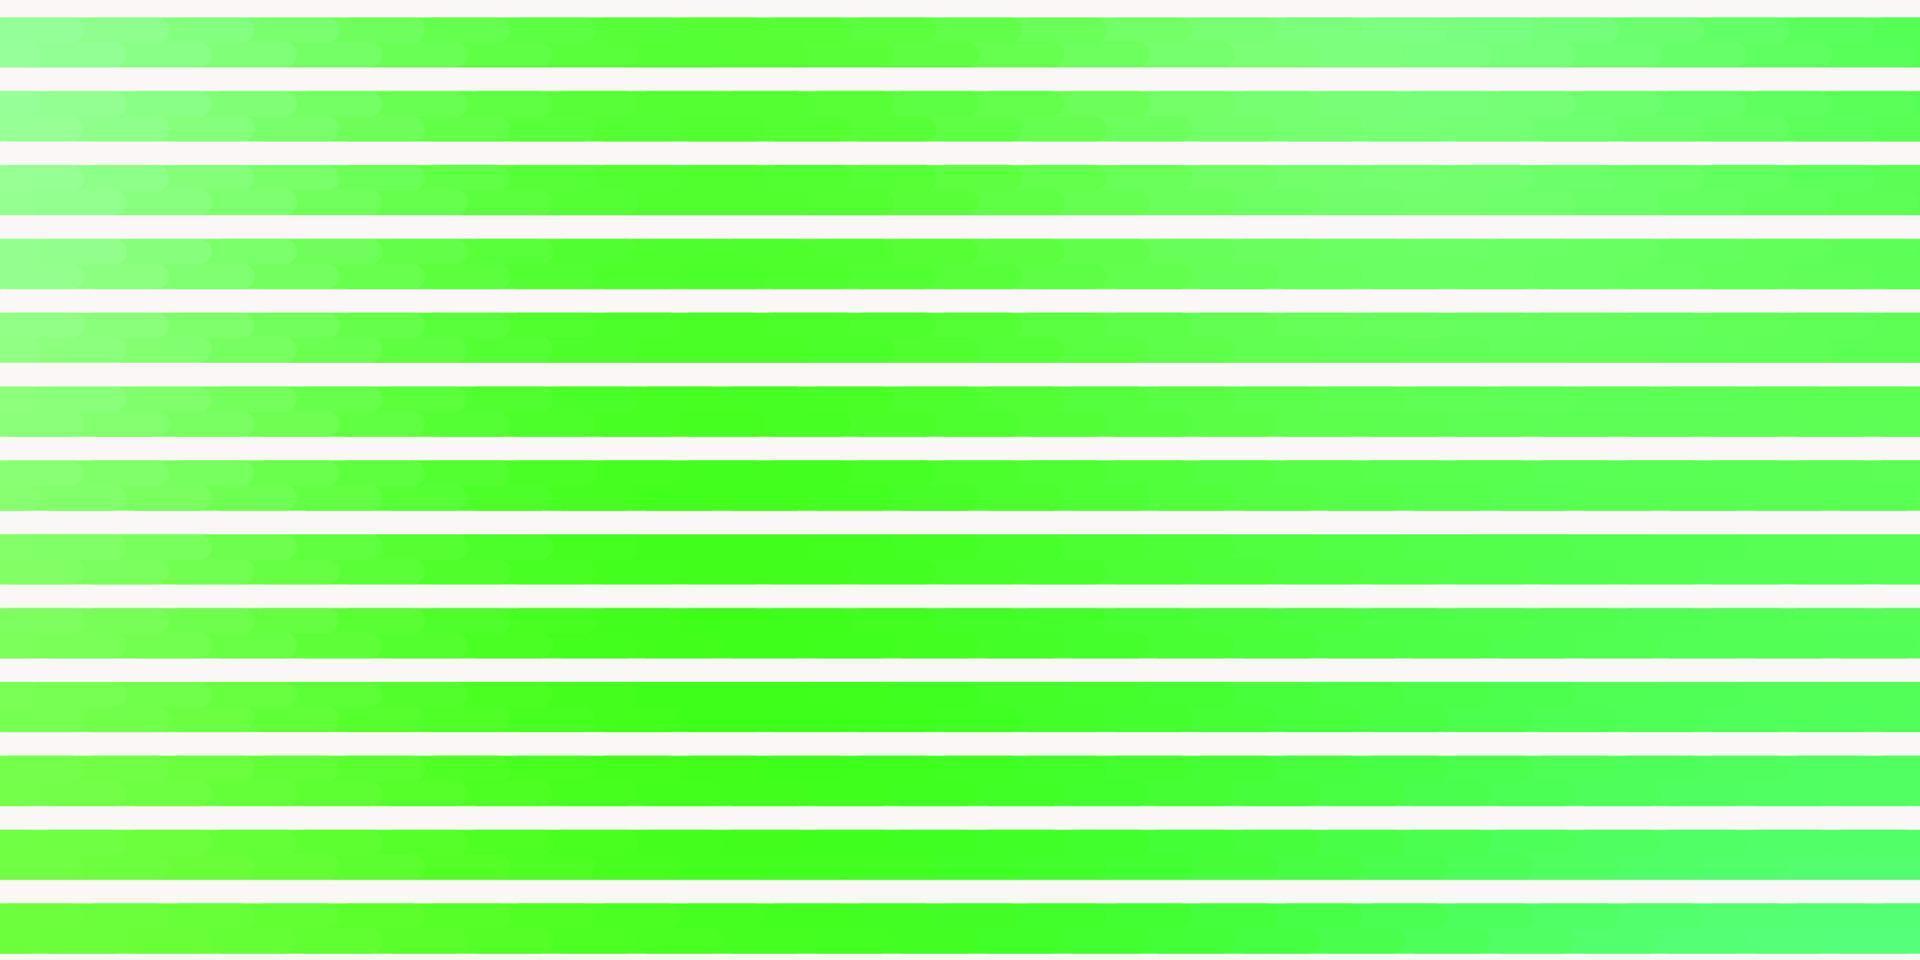 Light Green vector texture with lines.